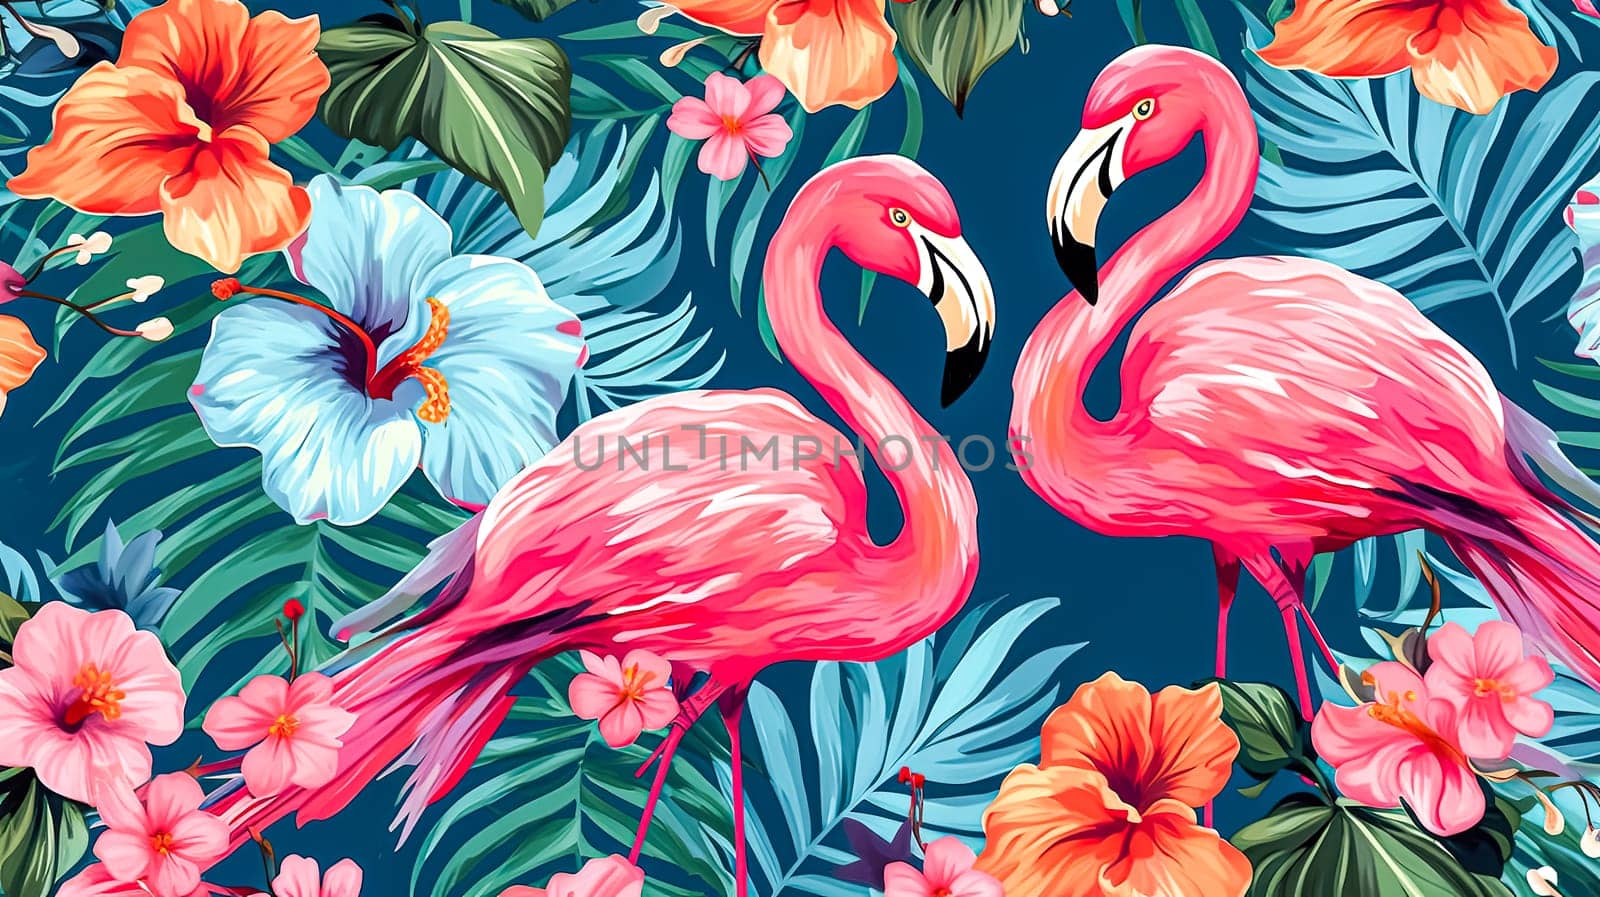 Transform your designs into a tropical paradise with our vibrant summer background. Featuring palm leaves, tropical plants, and flamingos, its perfect for a refreshing, summery atmosphere.